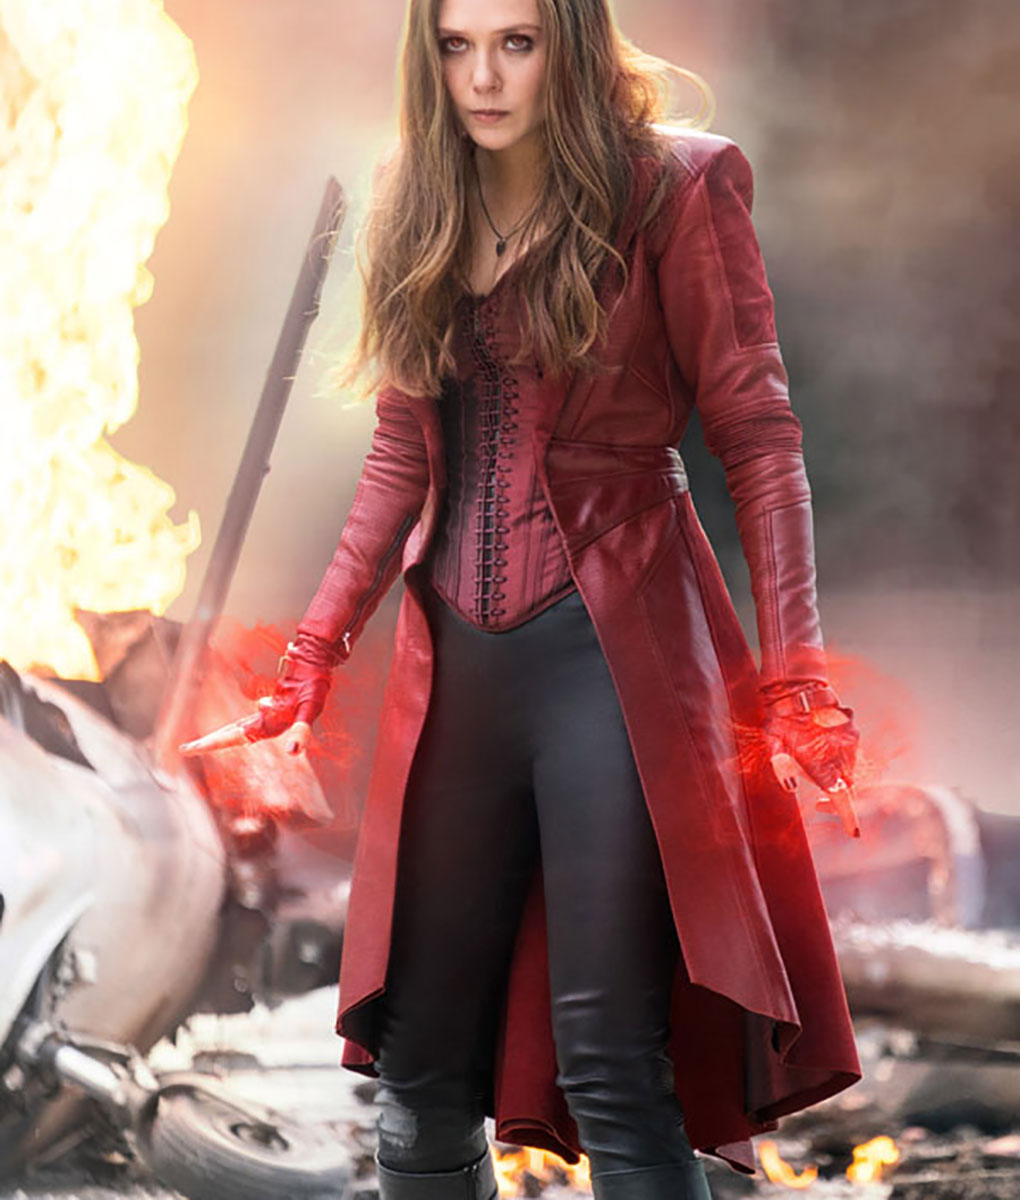 Civil War (Wanda Maximoff) Scarlet Witch Red Leather Coat